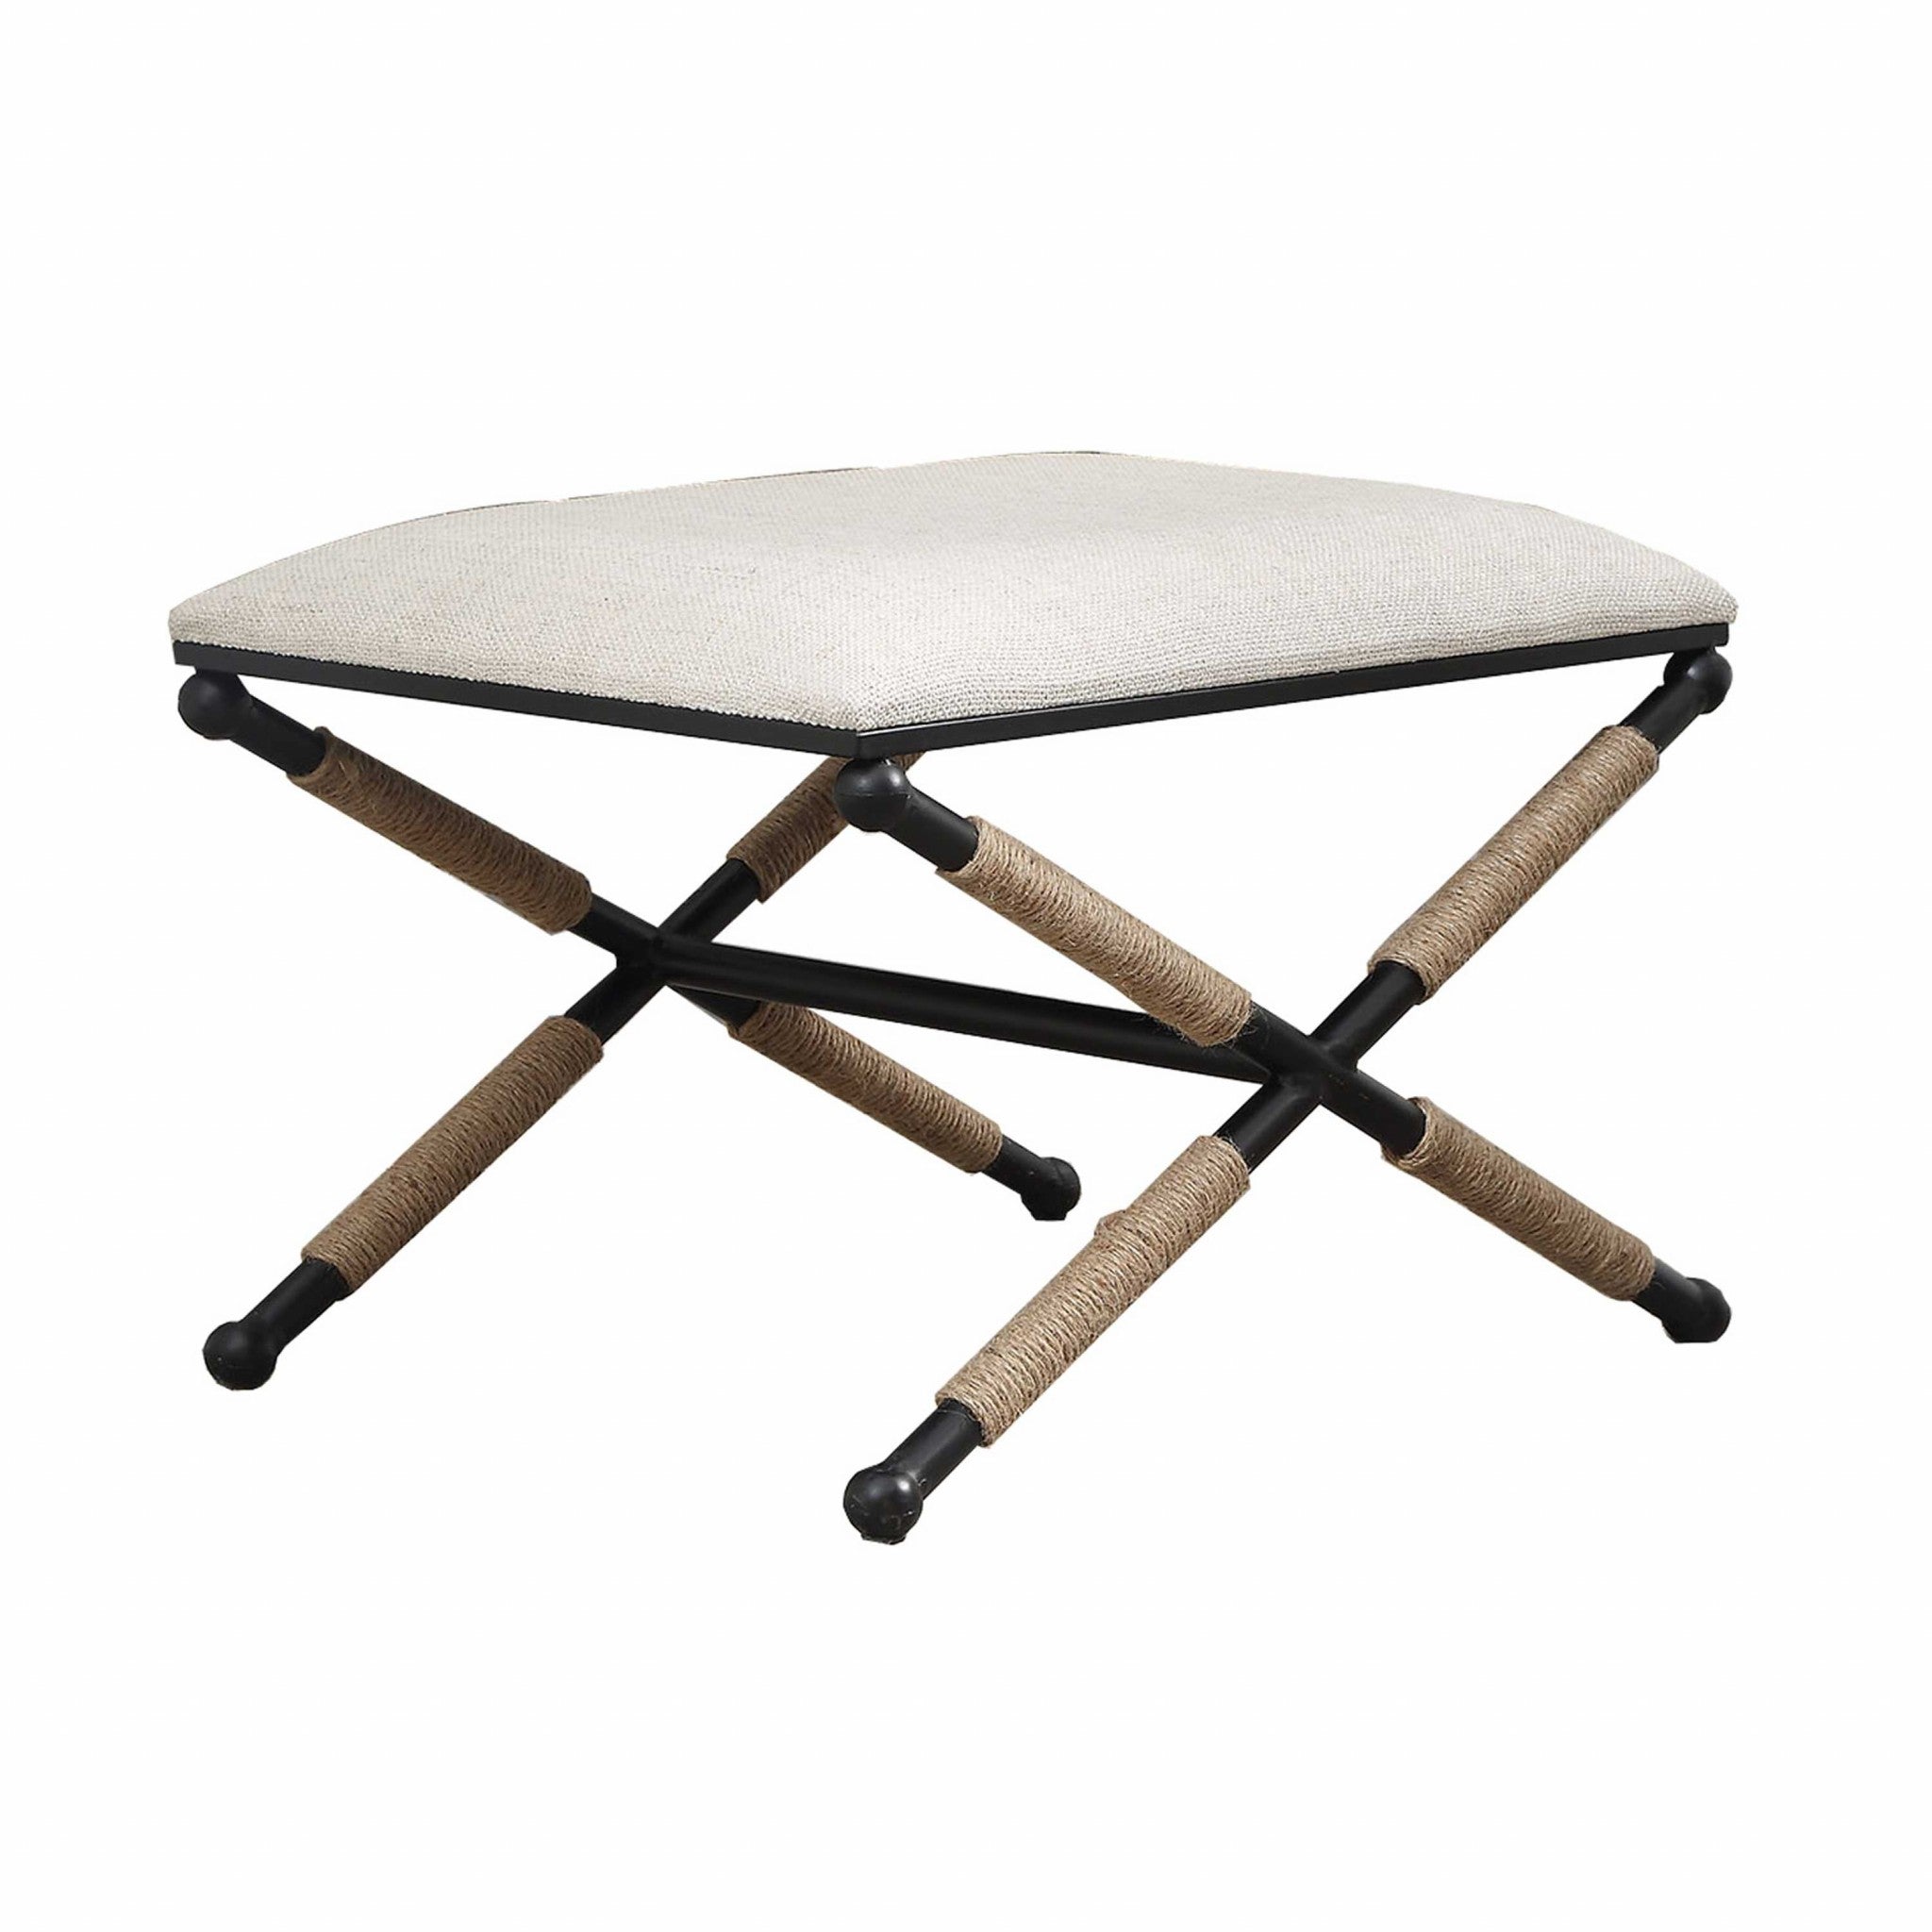 Fabric and Metal Accent Stool with Trestle Base, Black and White